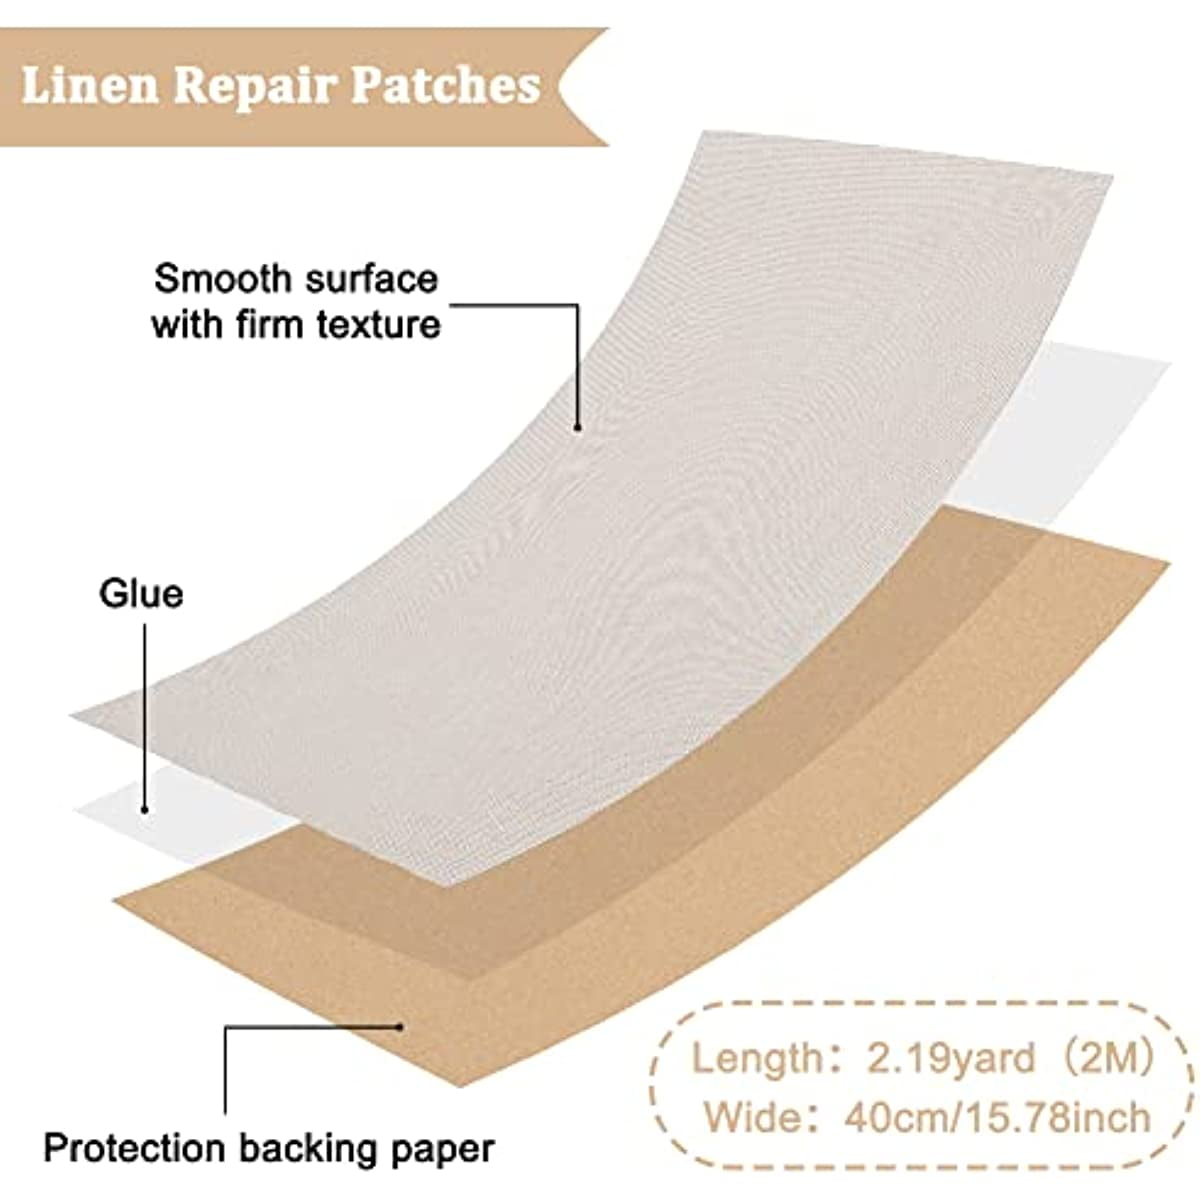 6 Pcs Coarse Linen Repair Patches Self Adhesive Linen Fabric Patches  Upholstery Carpet Patch Couch Patch Fabric Repair Patch 12 x 8 Inch for  Furniture